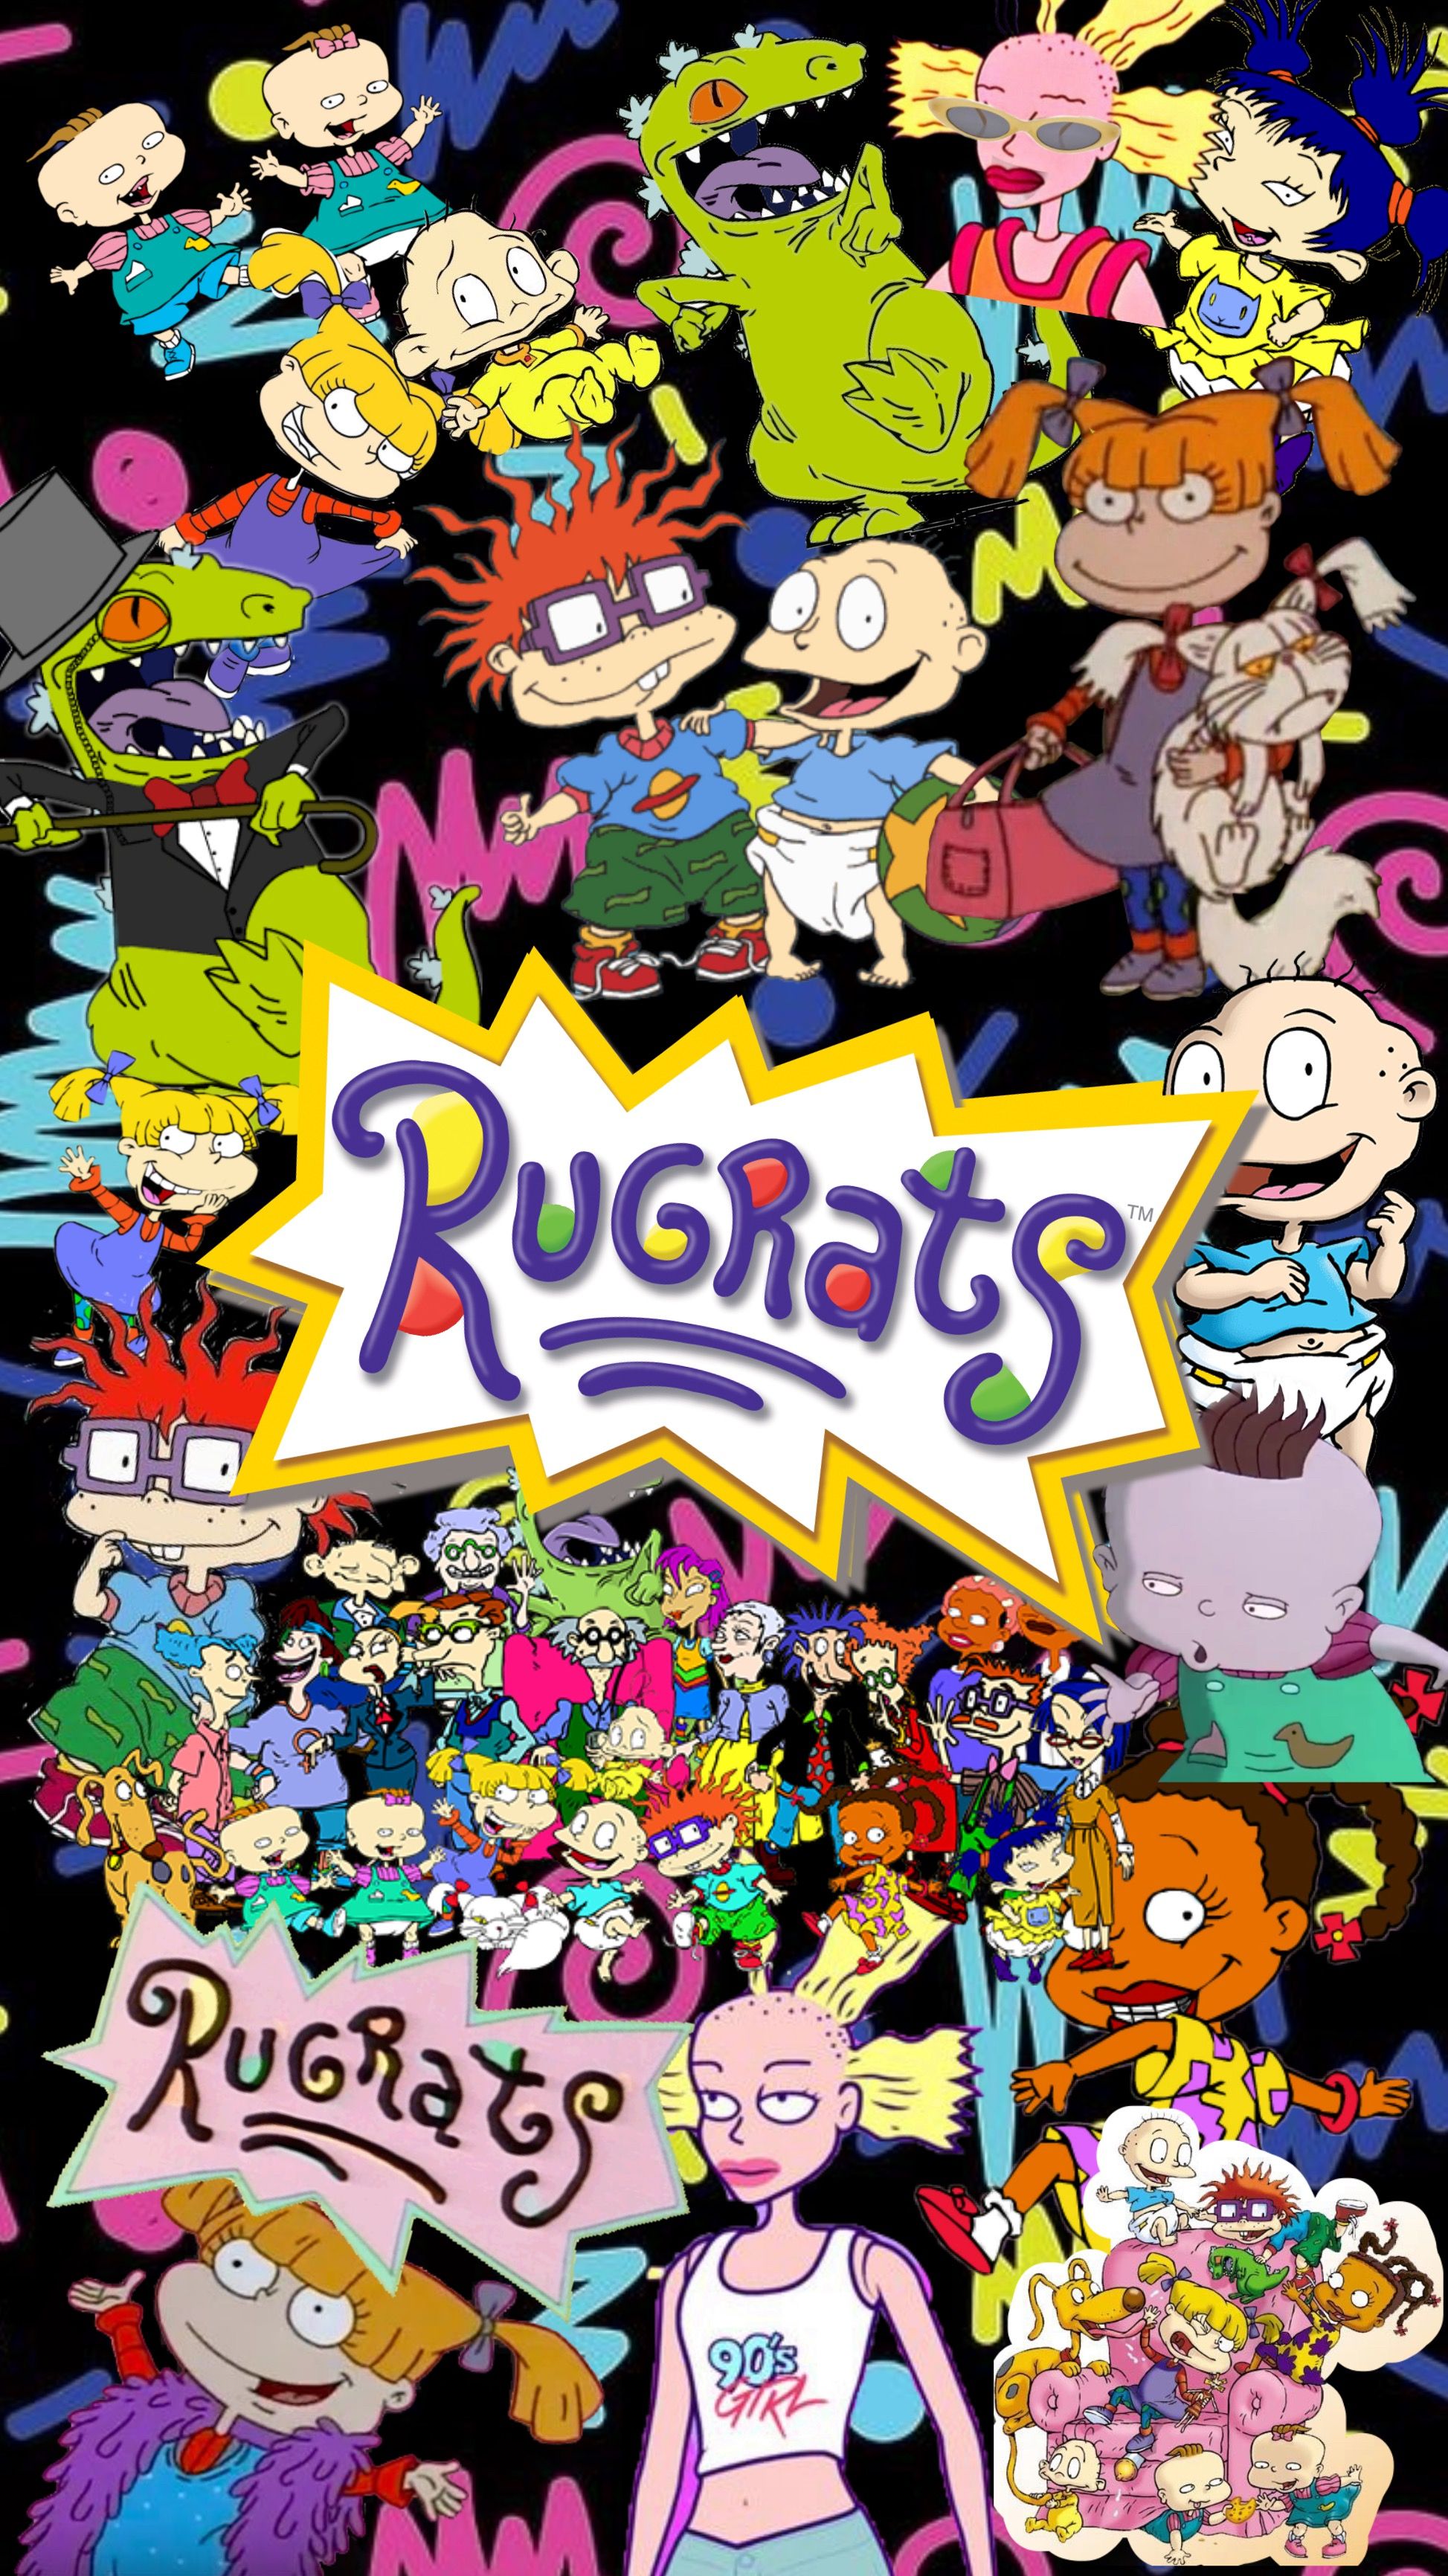 The Most Edited #rugrats